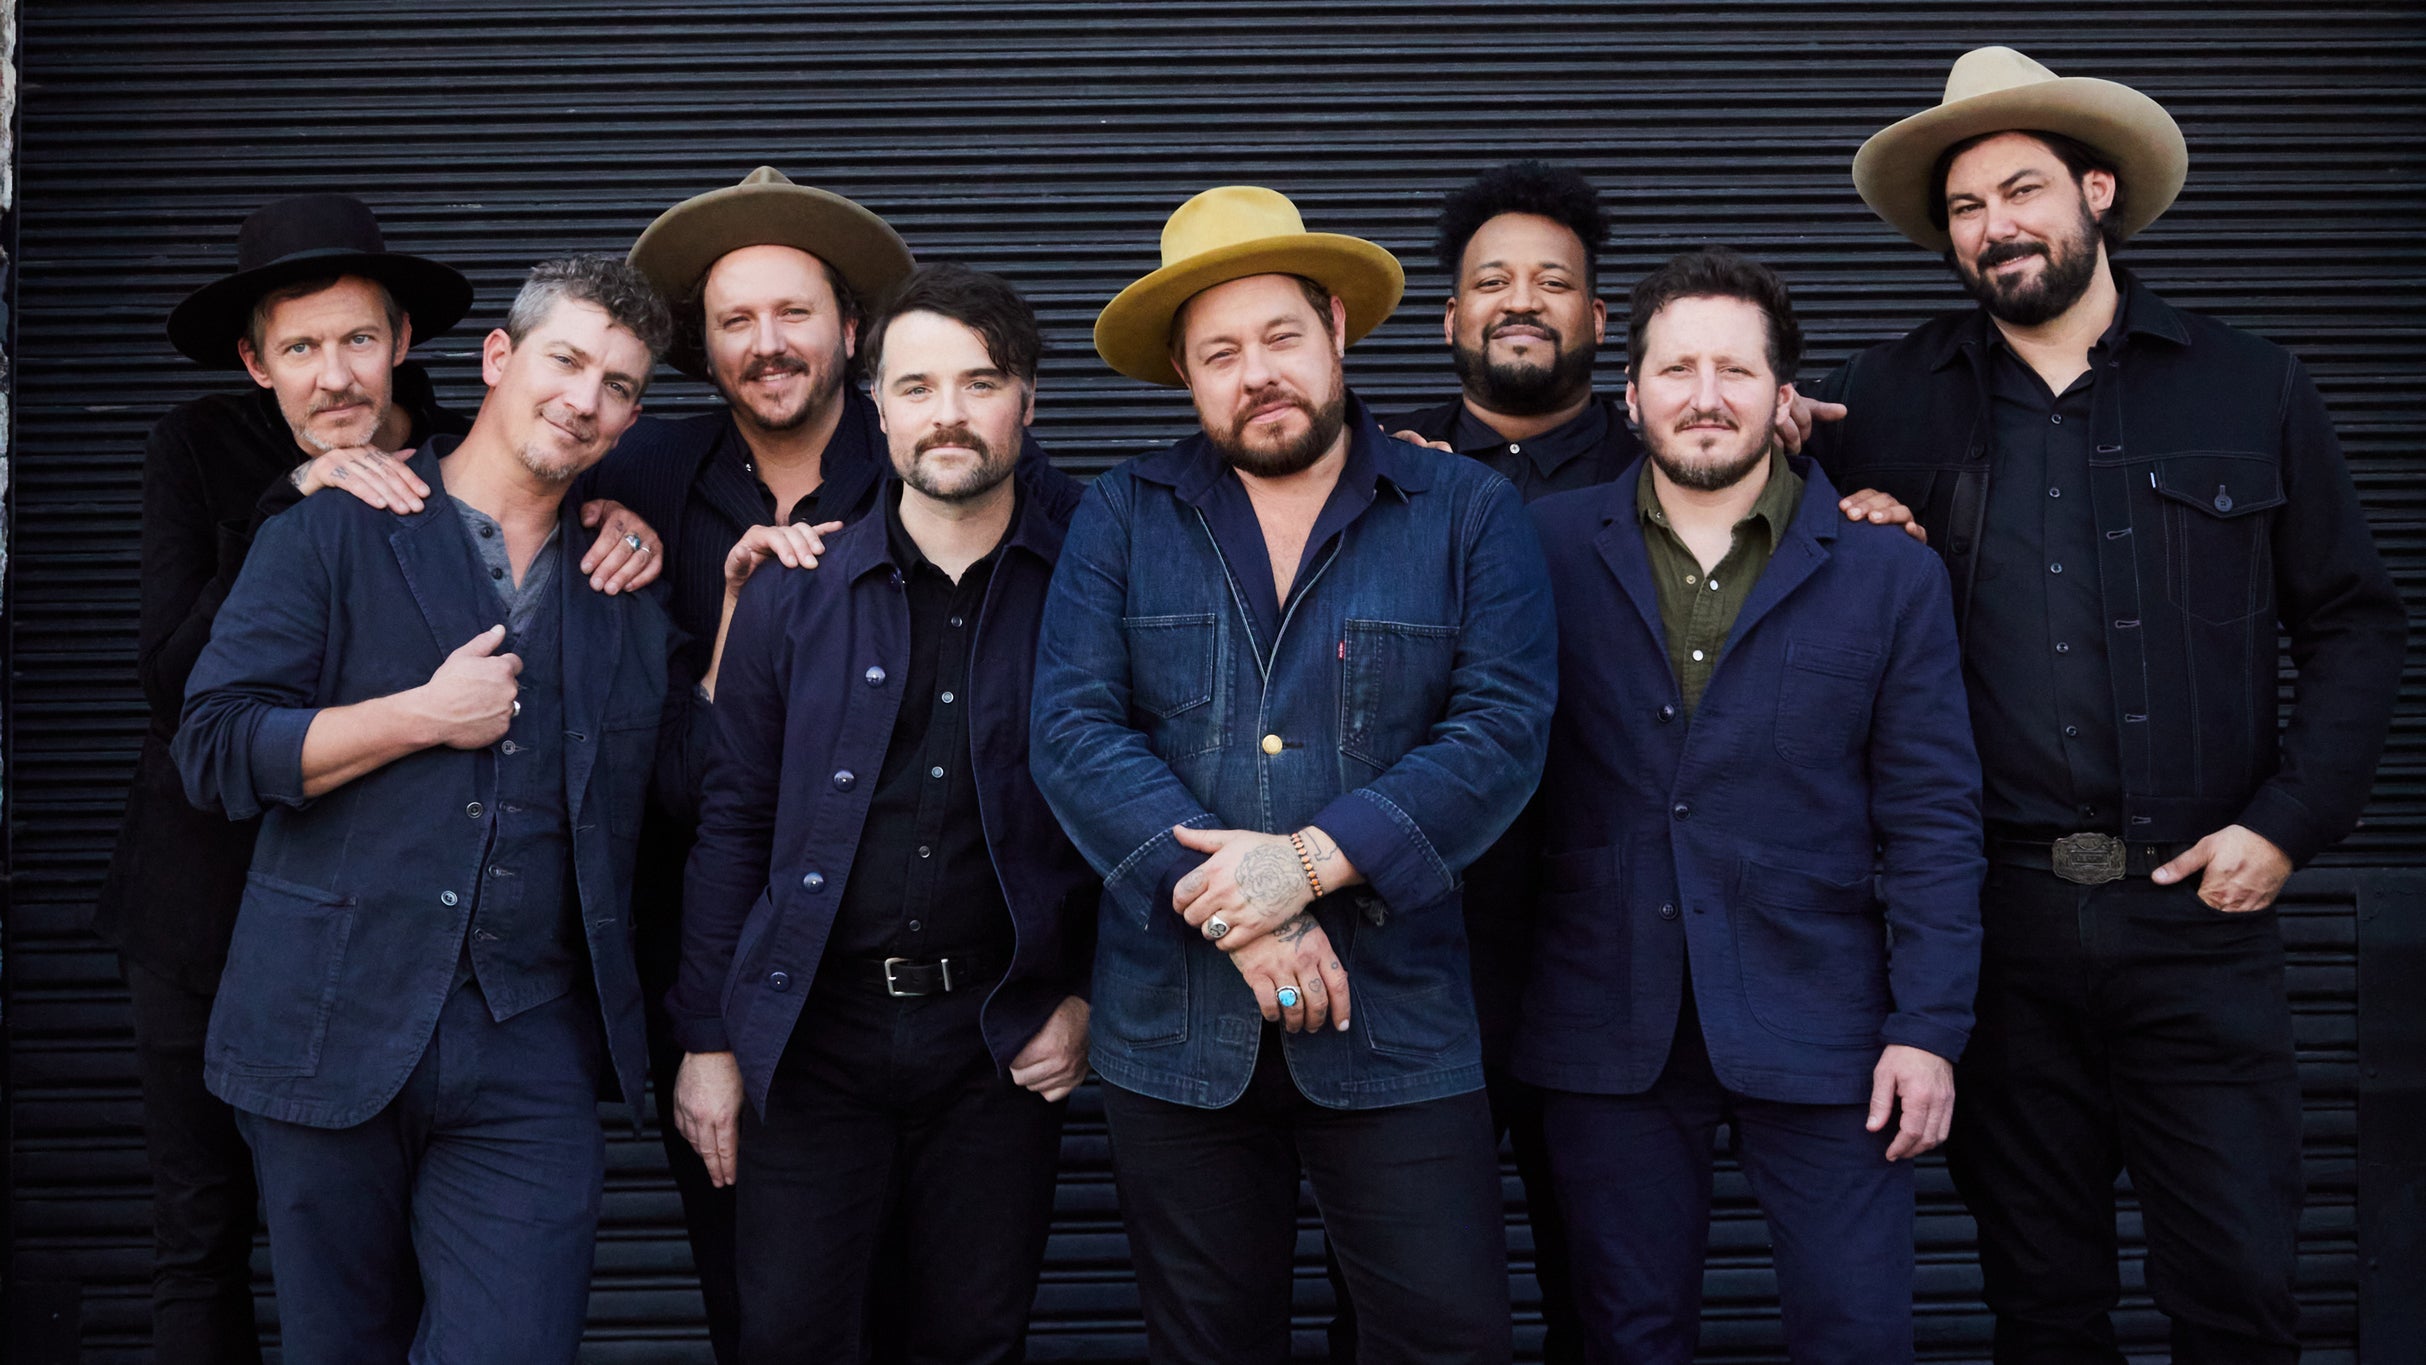 Eye To Eye Tour - Nathaniel Rateliff & TNS and My Morning Jacket presale code for real tickets in Columbia